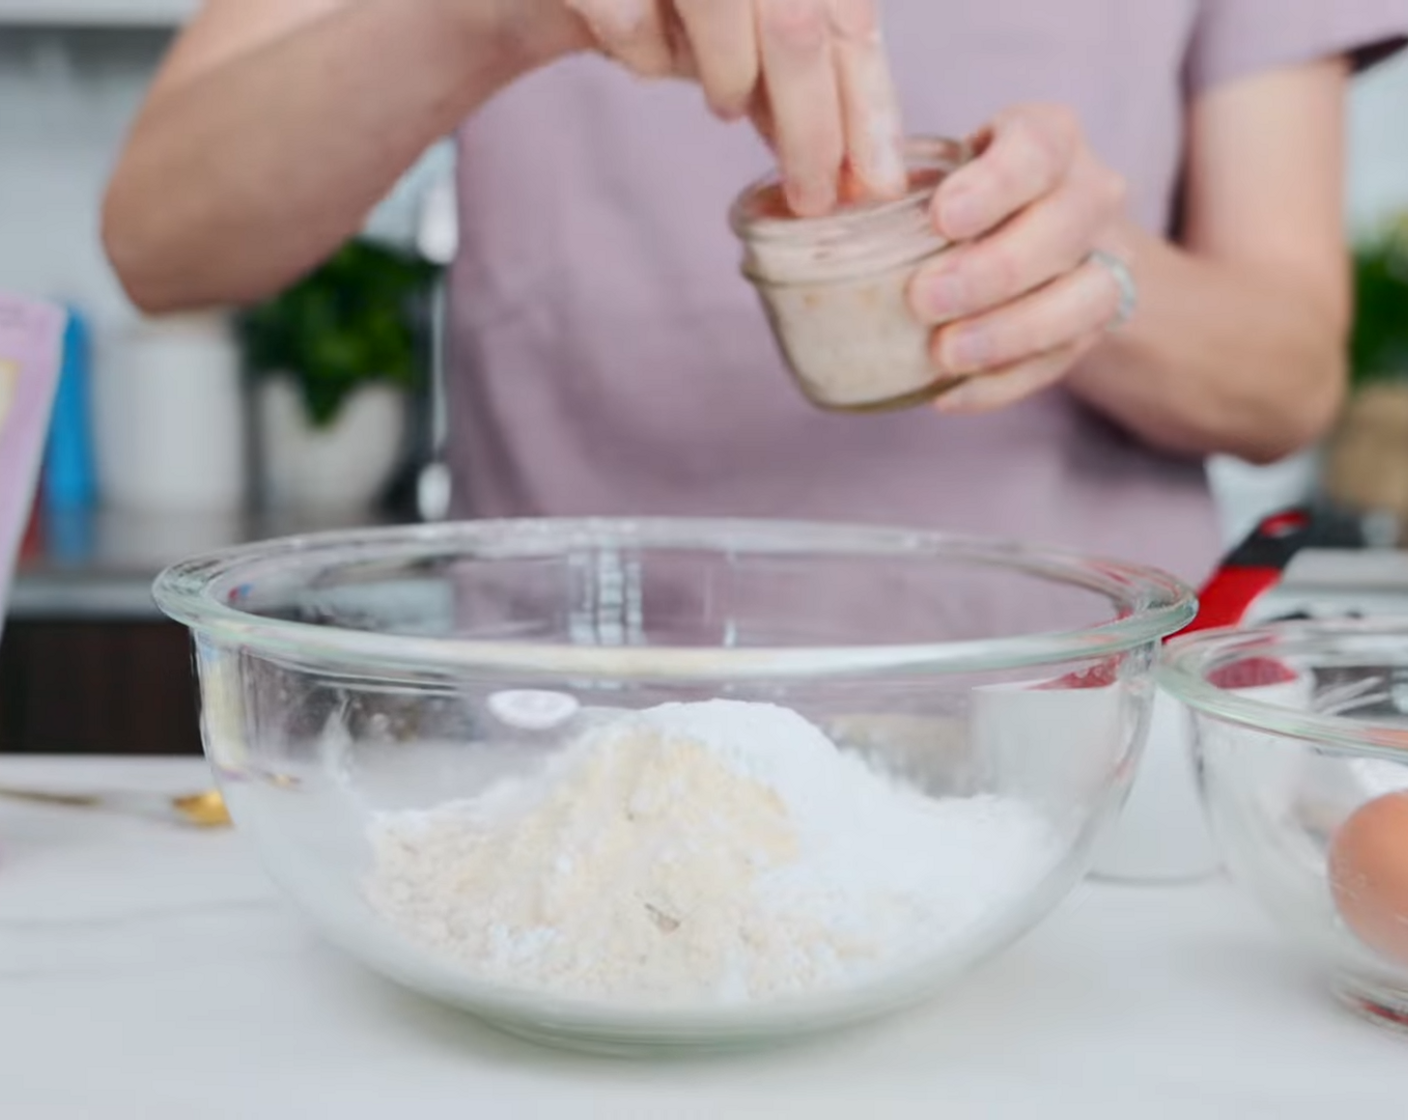 step 2 In a large mixing bowl, combine Oat Flour (1 1/2 cups), Tapioca Starch (1/4 cup), Coconut Flour (1/4 cup), Baking Soda (1/2 tsp), Baking Powder (1 tsp), and Fine Sea Salt (1 tsp). Mix together with a wire whisk.